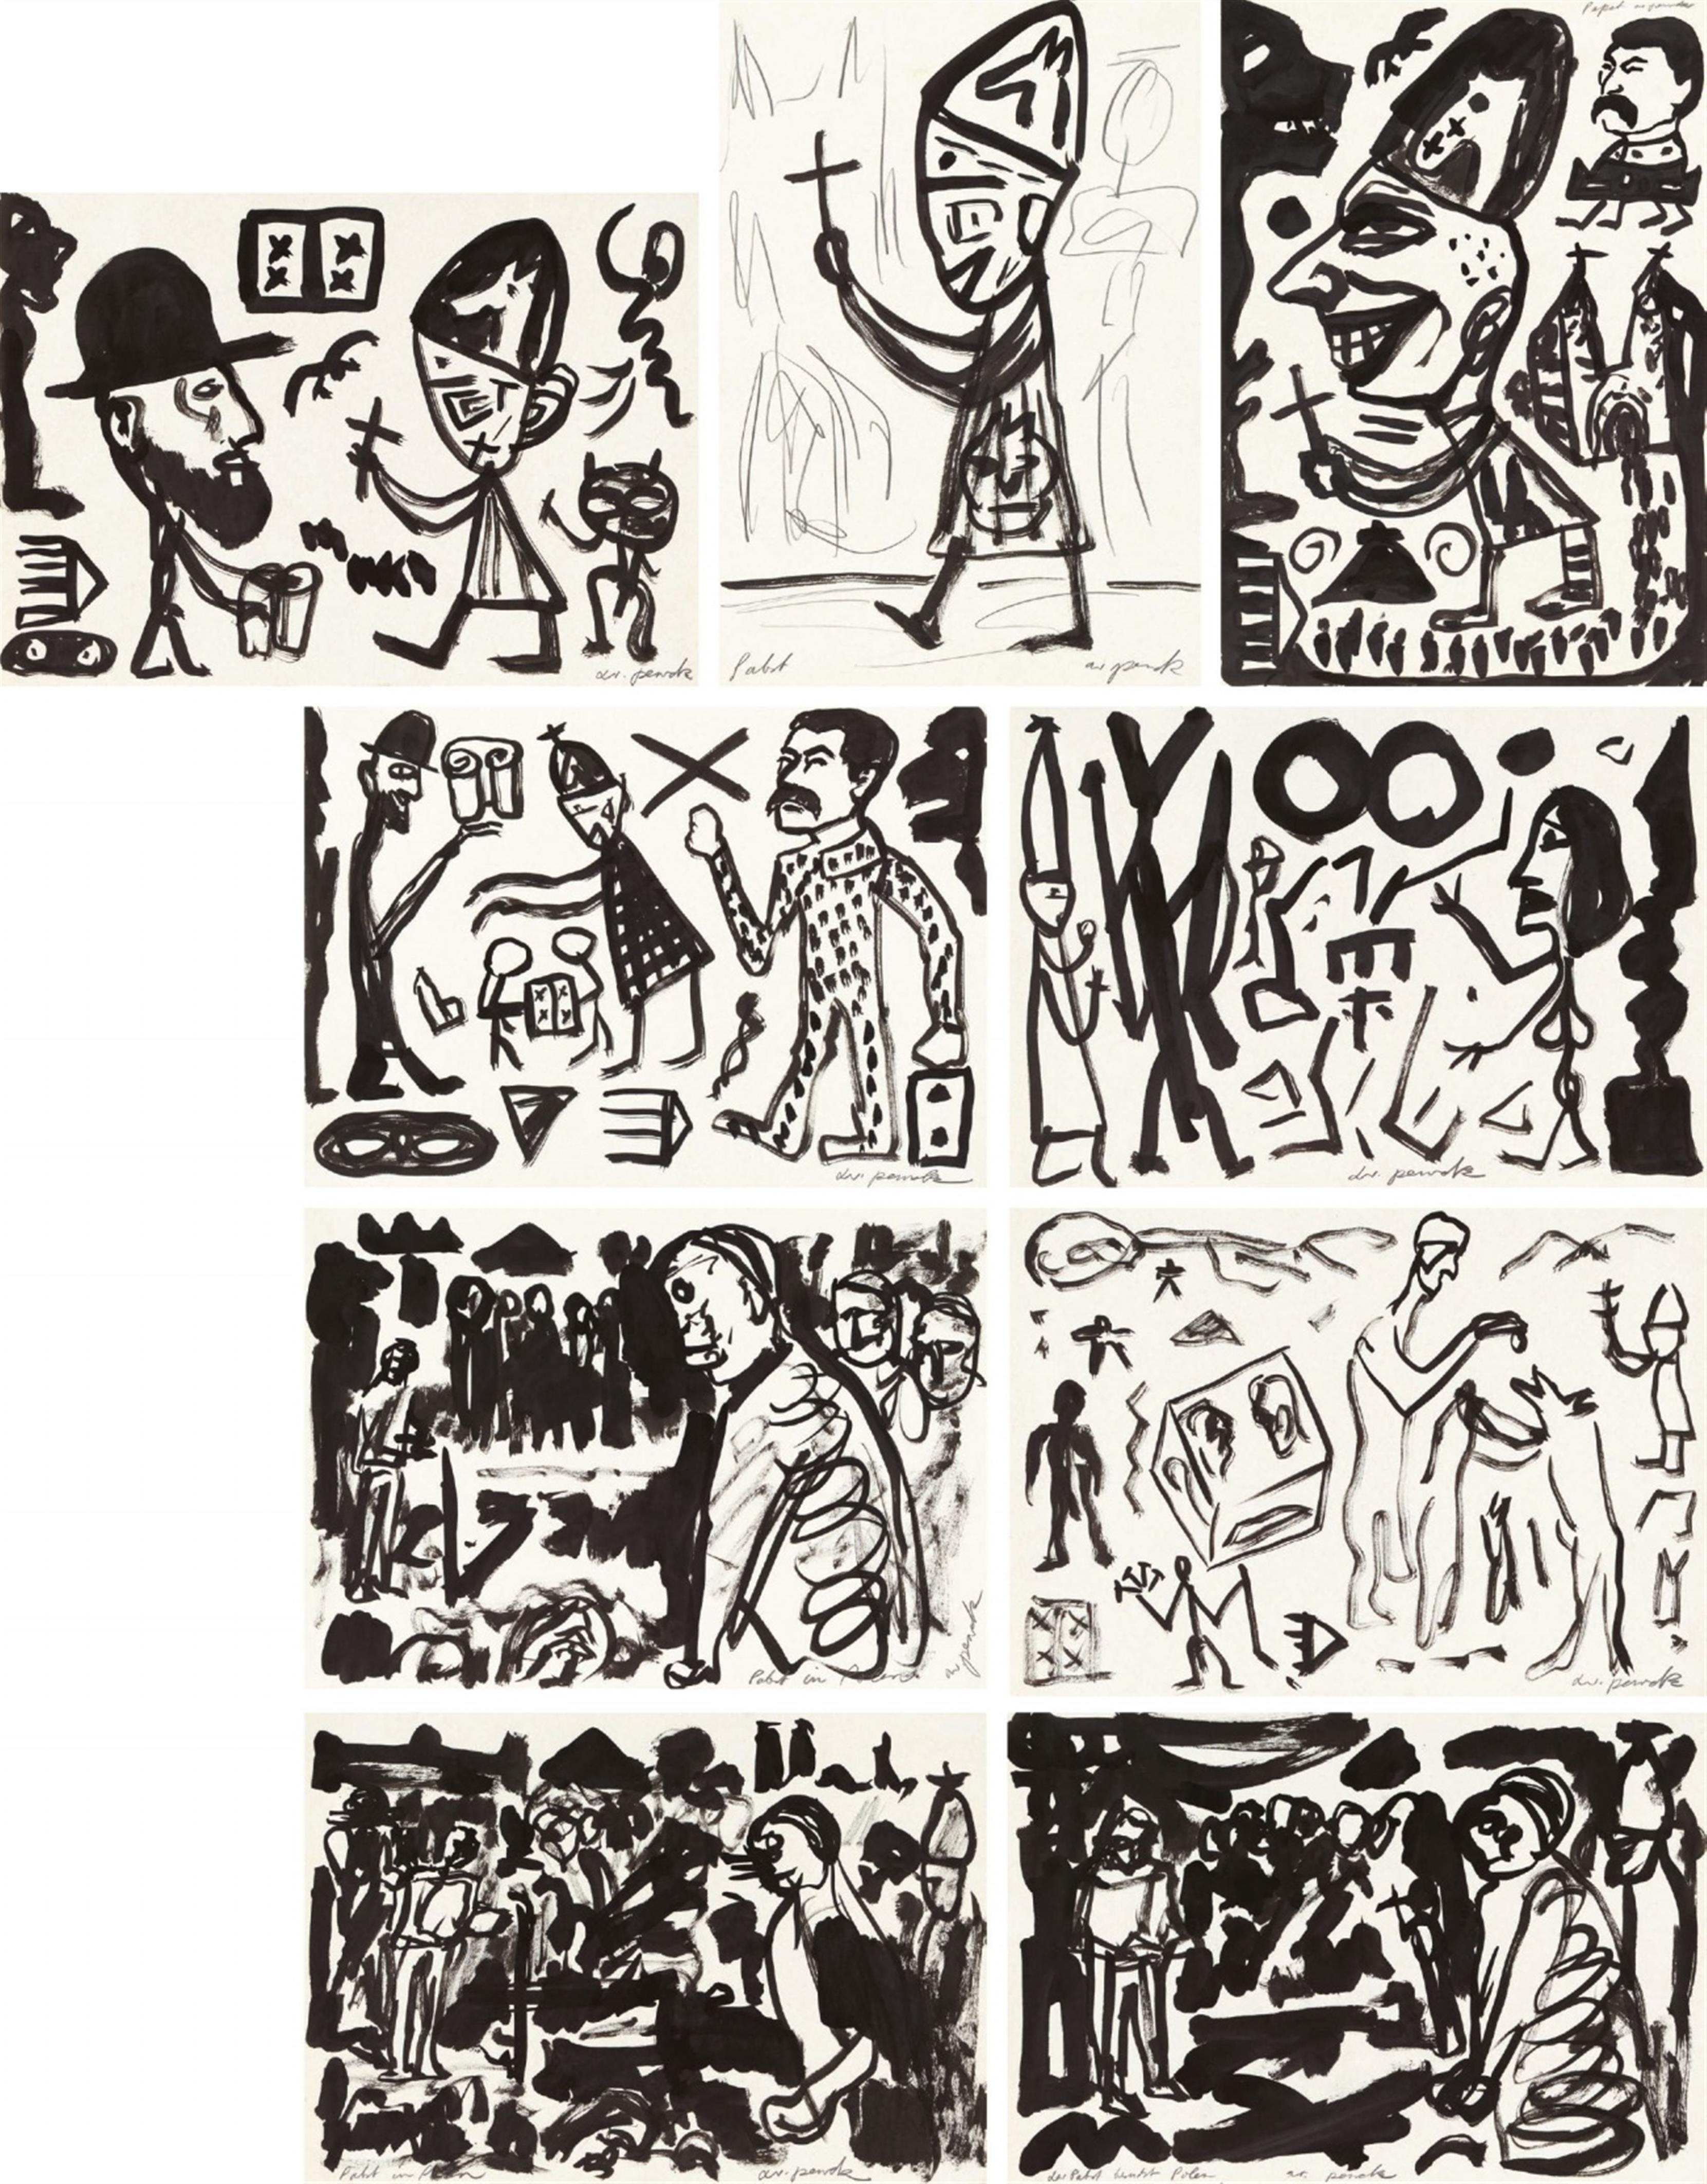 A.R. Penck - Pabst in Polen - image-1